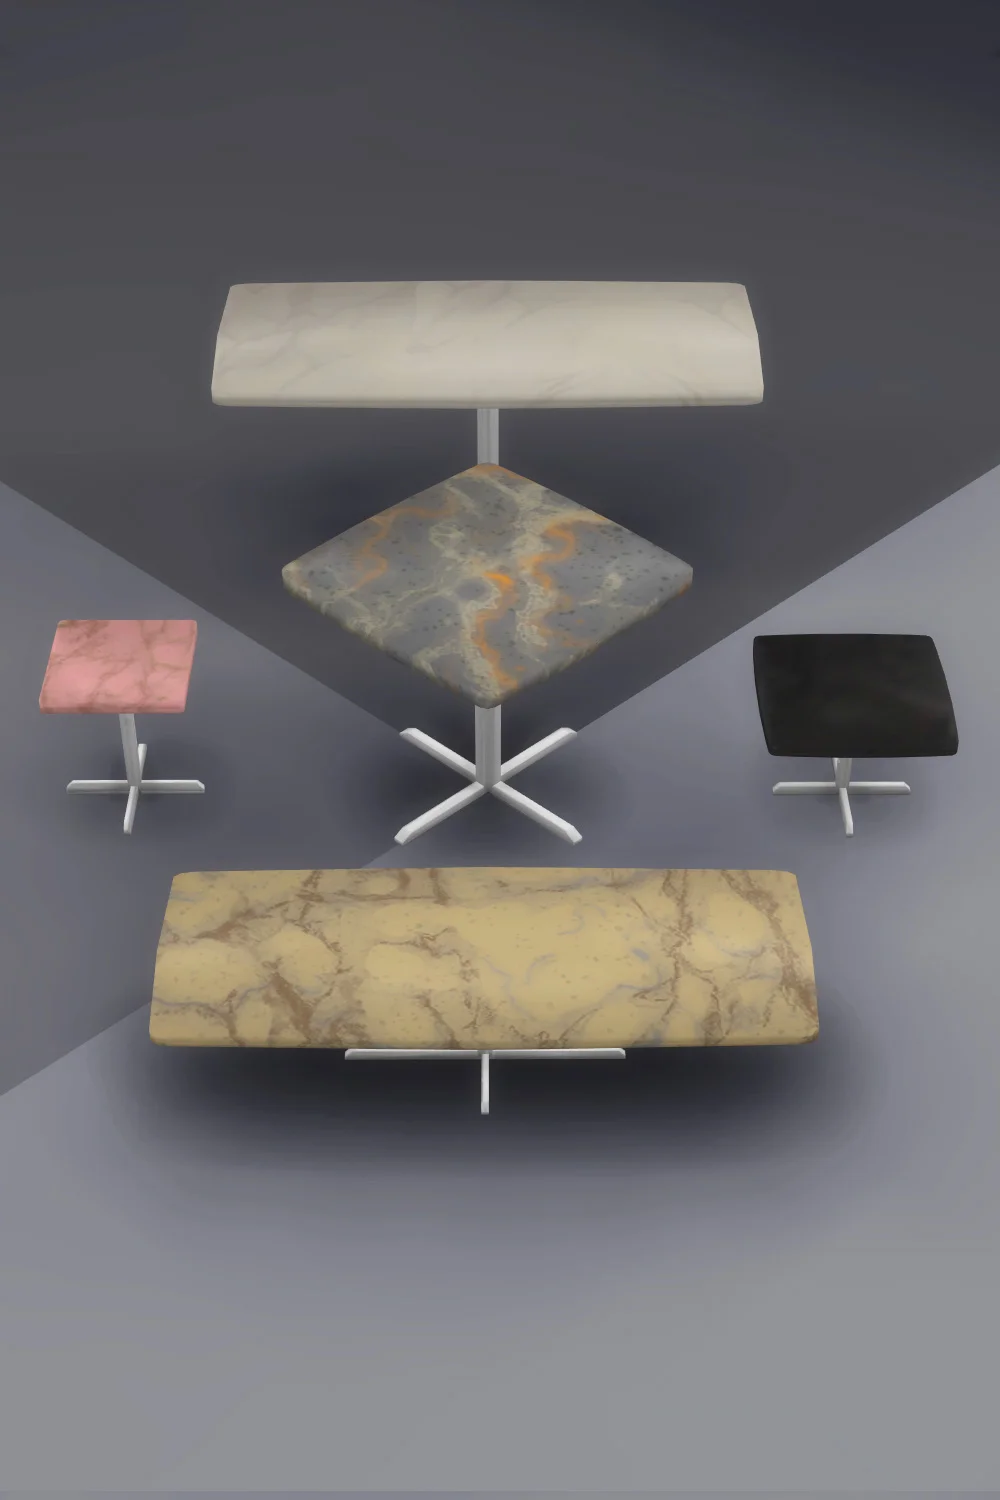 The Sims 4 CC Furniture Marble Table Set